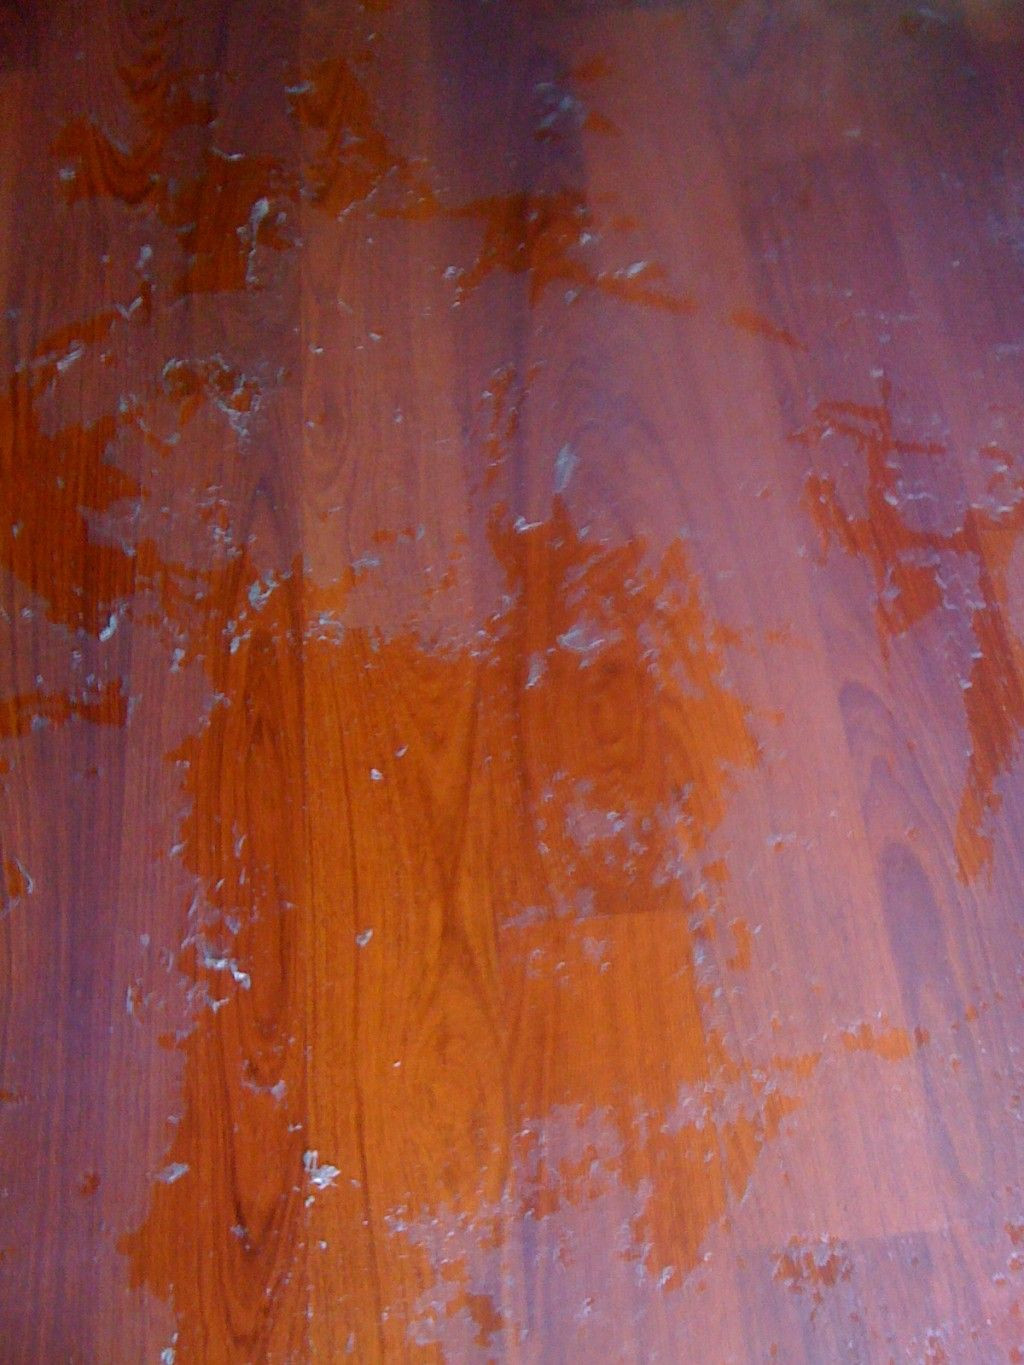 hardwood floor cleaner uk of how to remove wax and oil soap cleaners from wood floors recipes with how to remove oily or wax build up from cleaning or polishing solutions from wood floors